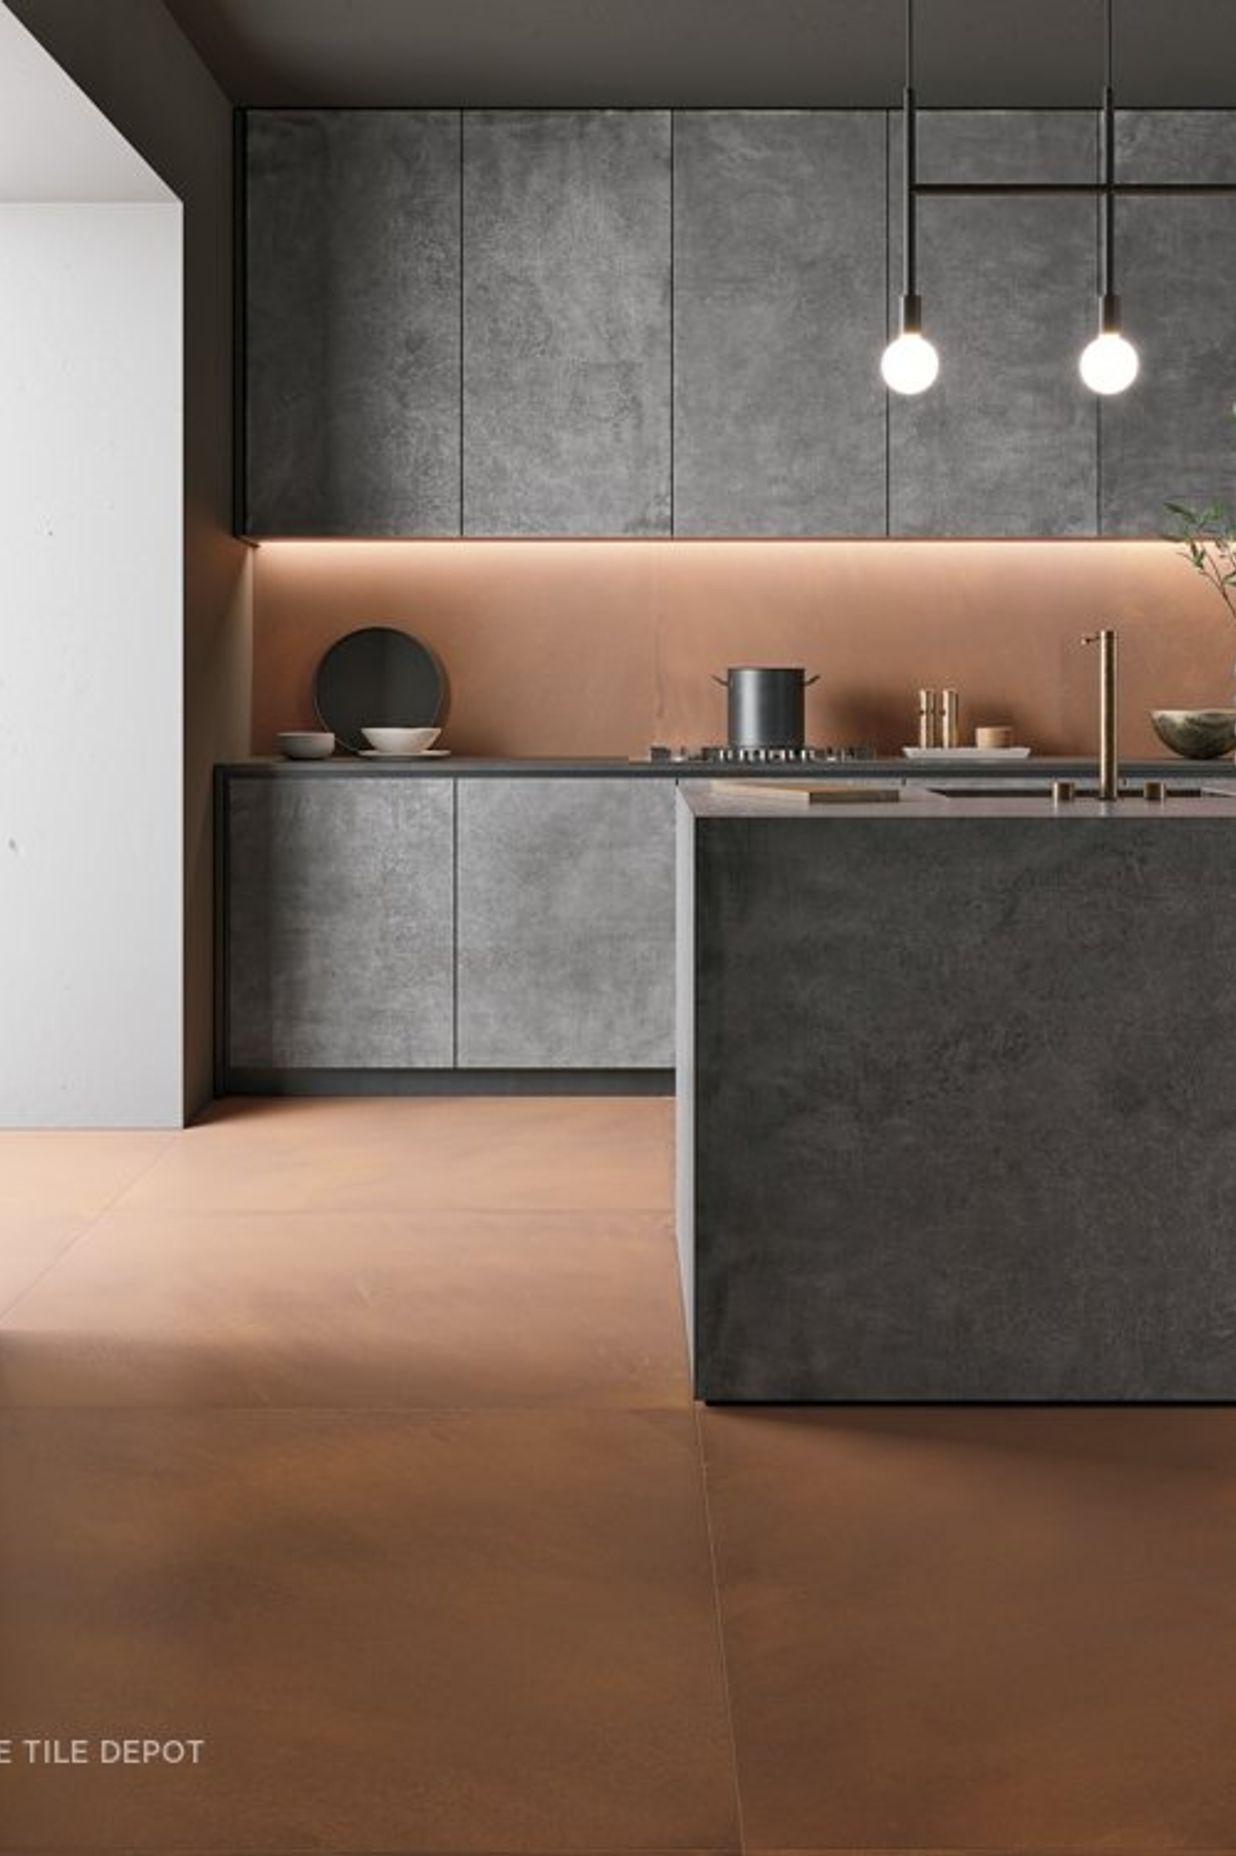 Foil Porcelain tiles are installed in the Splashback as well as the floors and give a sense of Urban Luxury. A contrasting cement finish tiles are also used as the front of cupboards to add to the industrial kitchen design (Tile Depot, 2021)